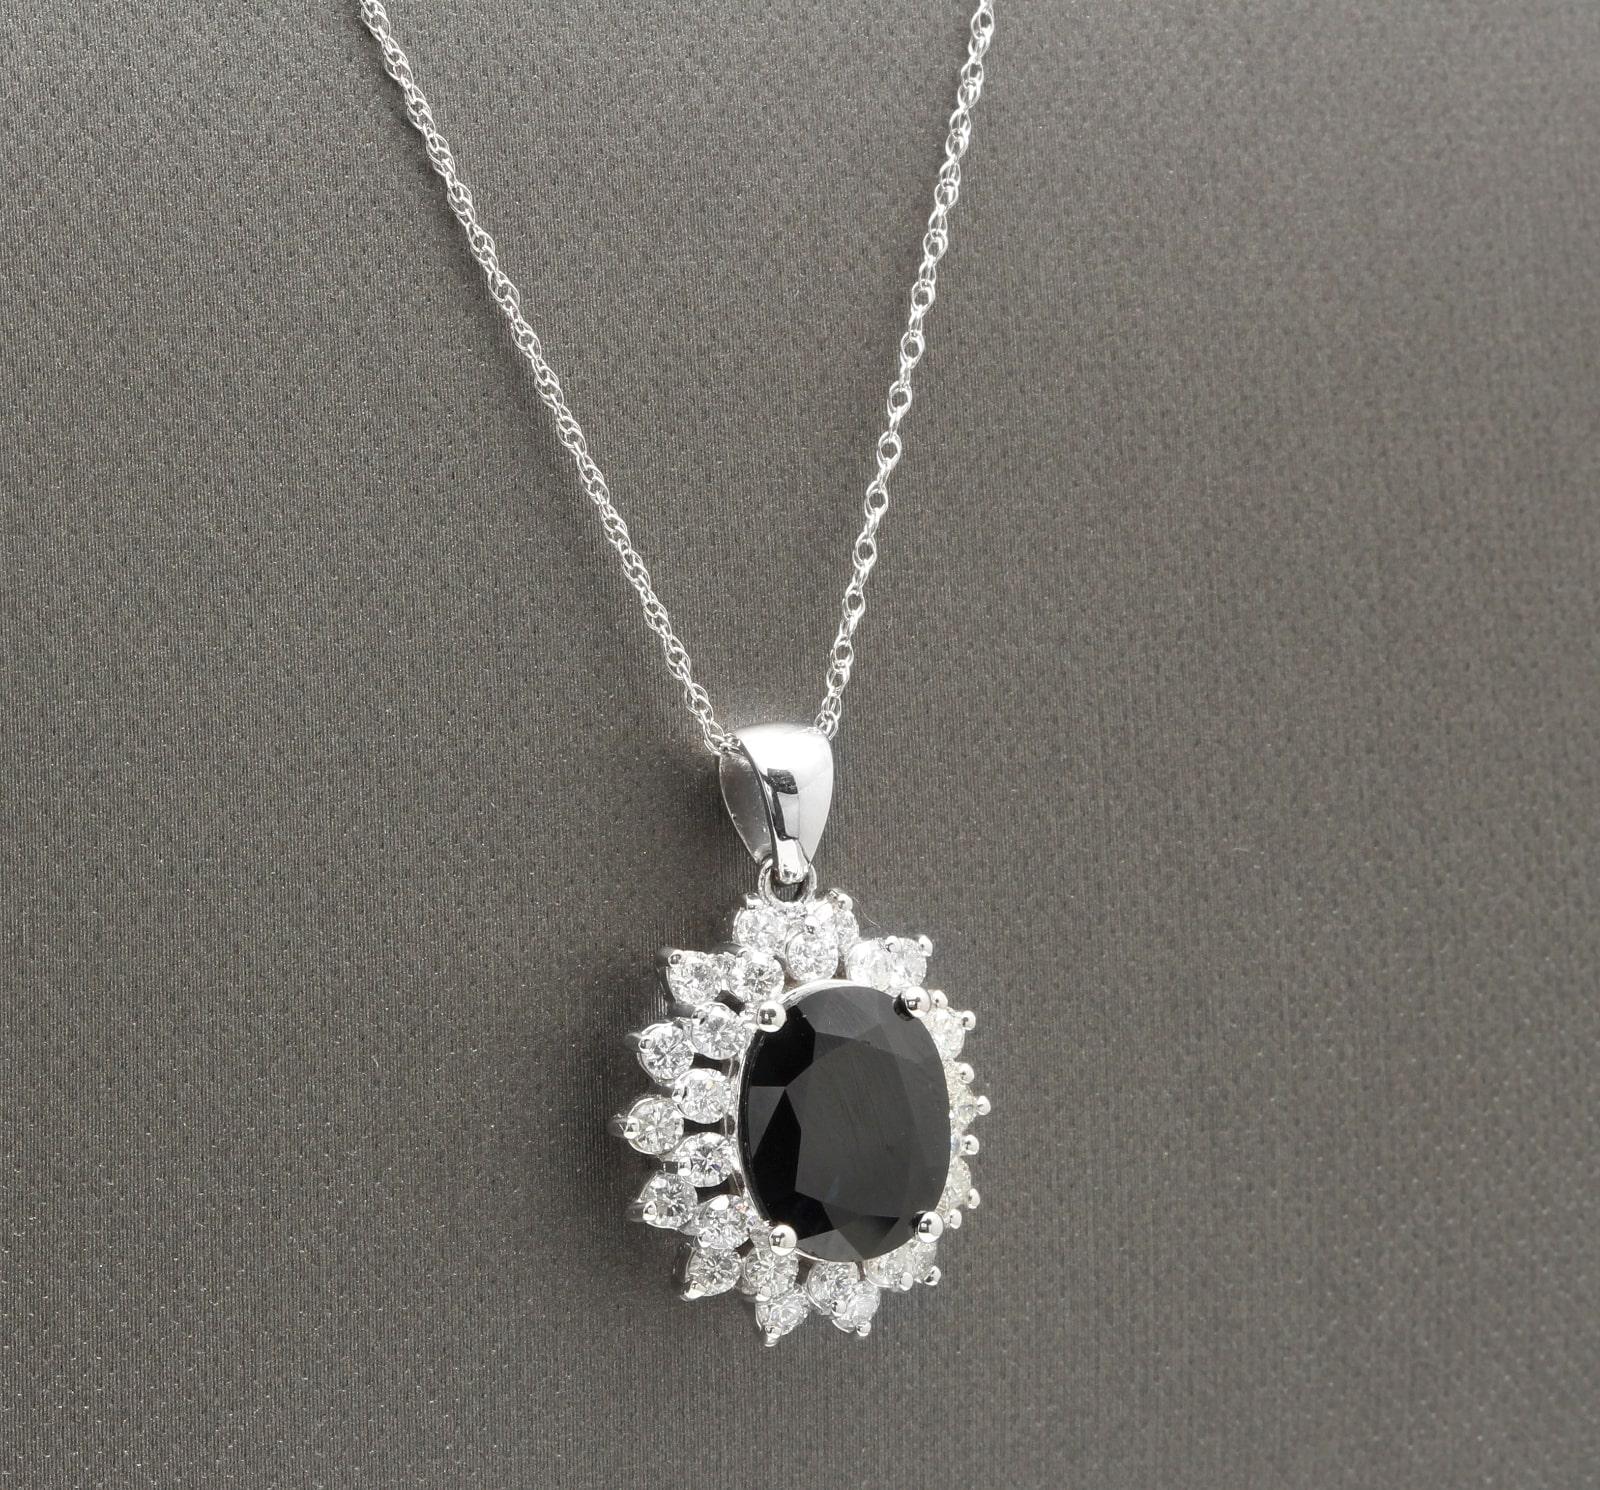 7.30Ct Natural Sapphire and Diamond 14K Solid White Gold Necklace

Amazing looking piece! 

Stamped: 14K

Suggested Replacement Value: $6,500.00 

Natural Oval Cut Sapphire Weights: Approx. 6.00 Carats

Sapphire Measures: Approx. 12.00 x